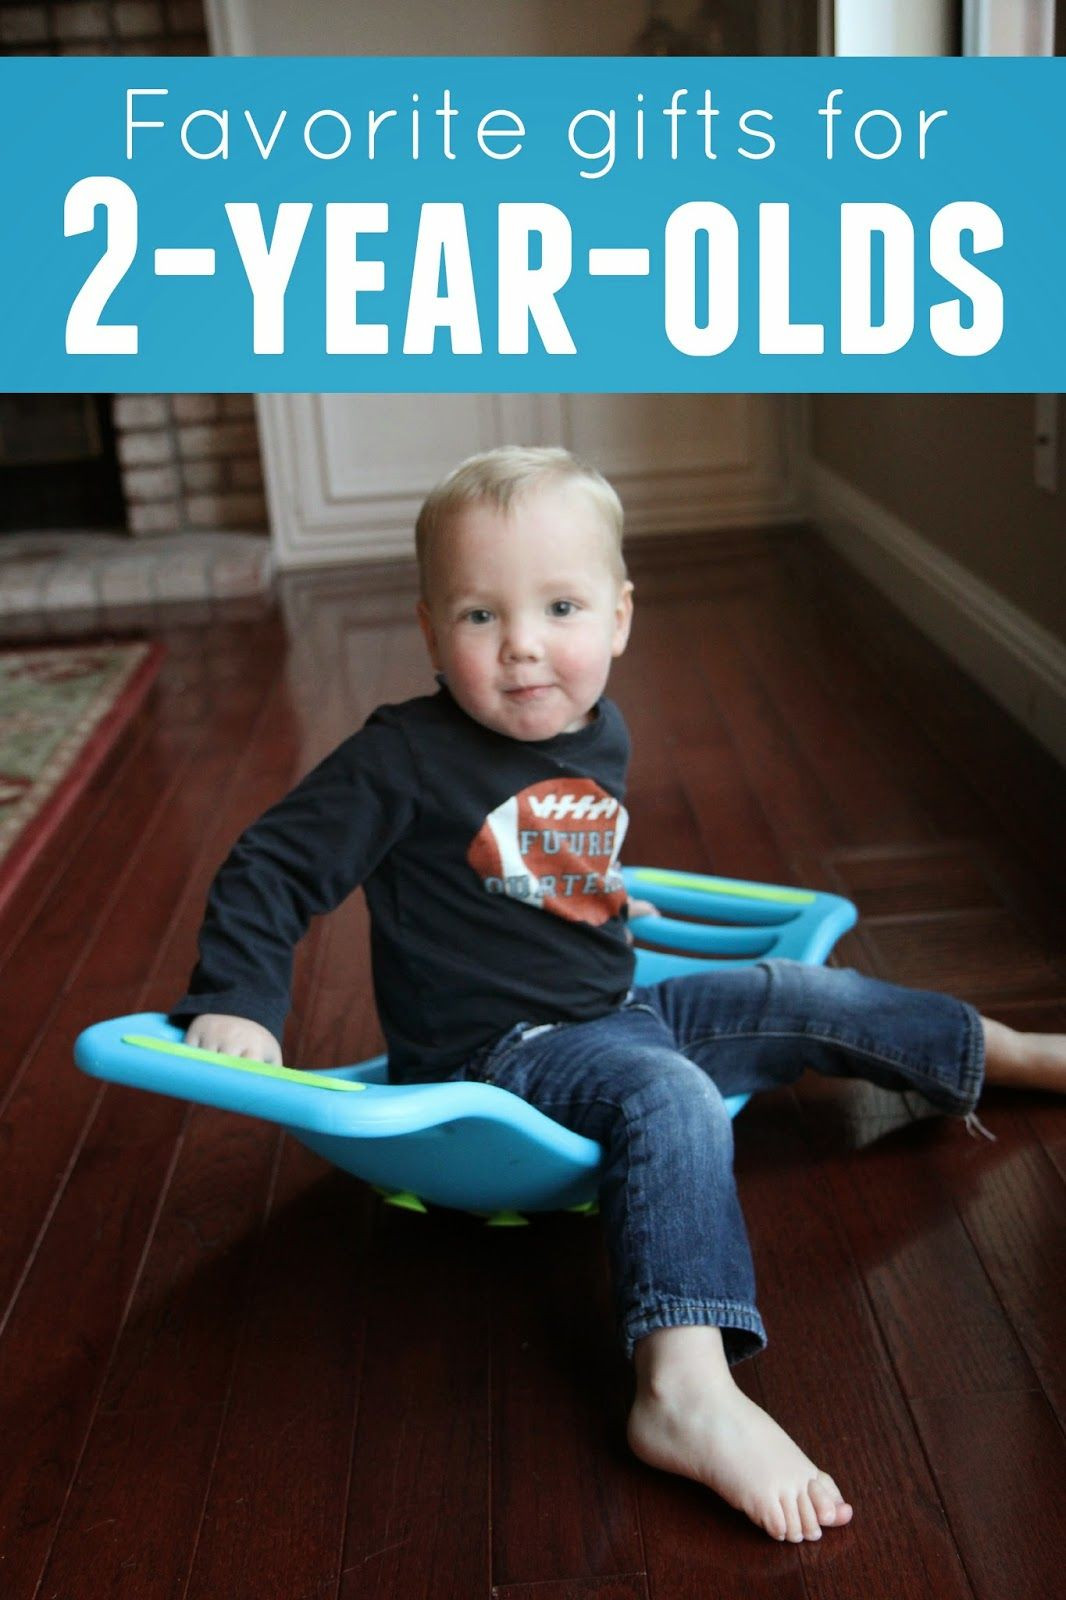 Gift Ideas For 2 Year Old Boys
 Favorite Gifts for 2 Year Olds